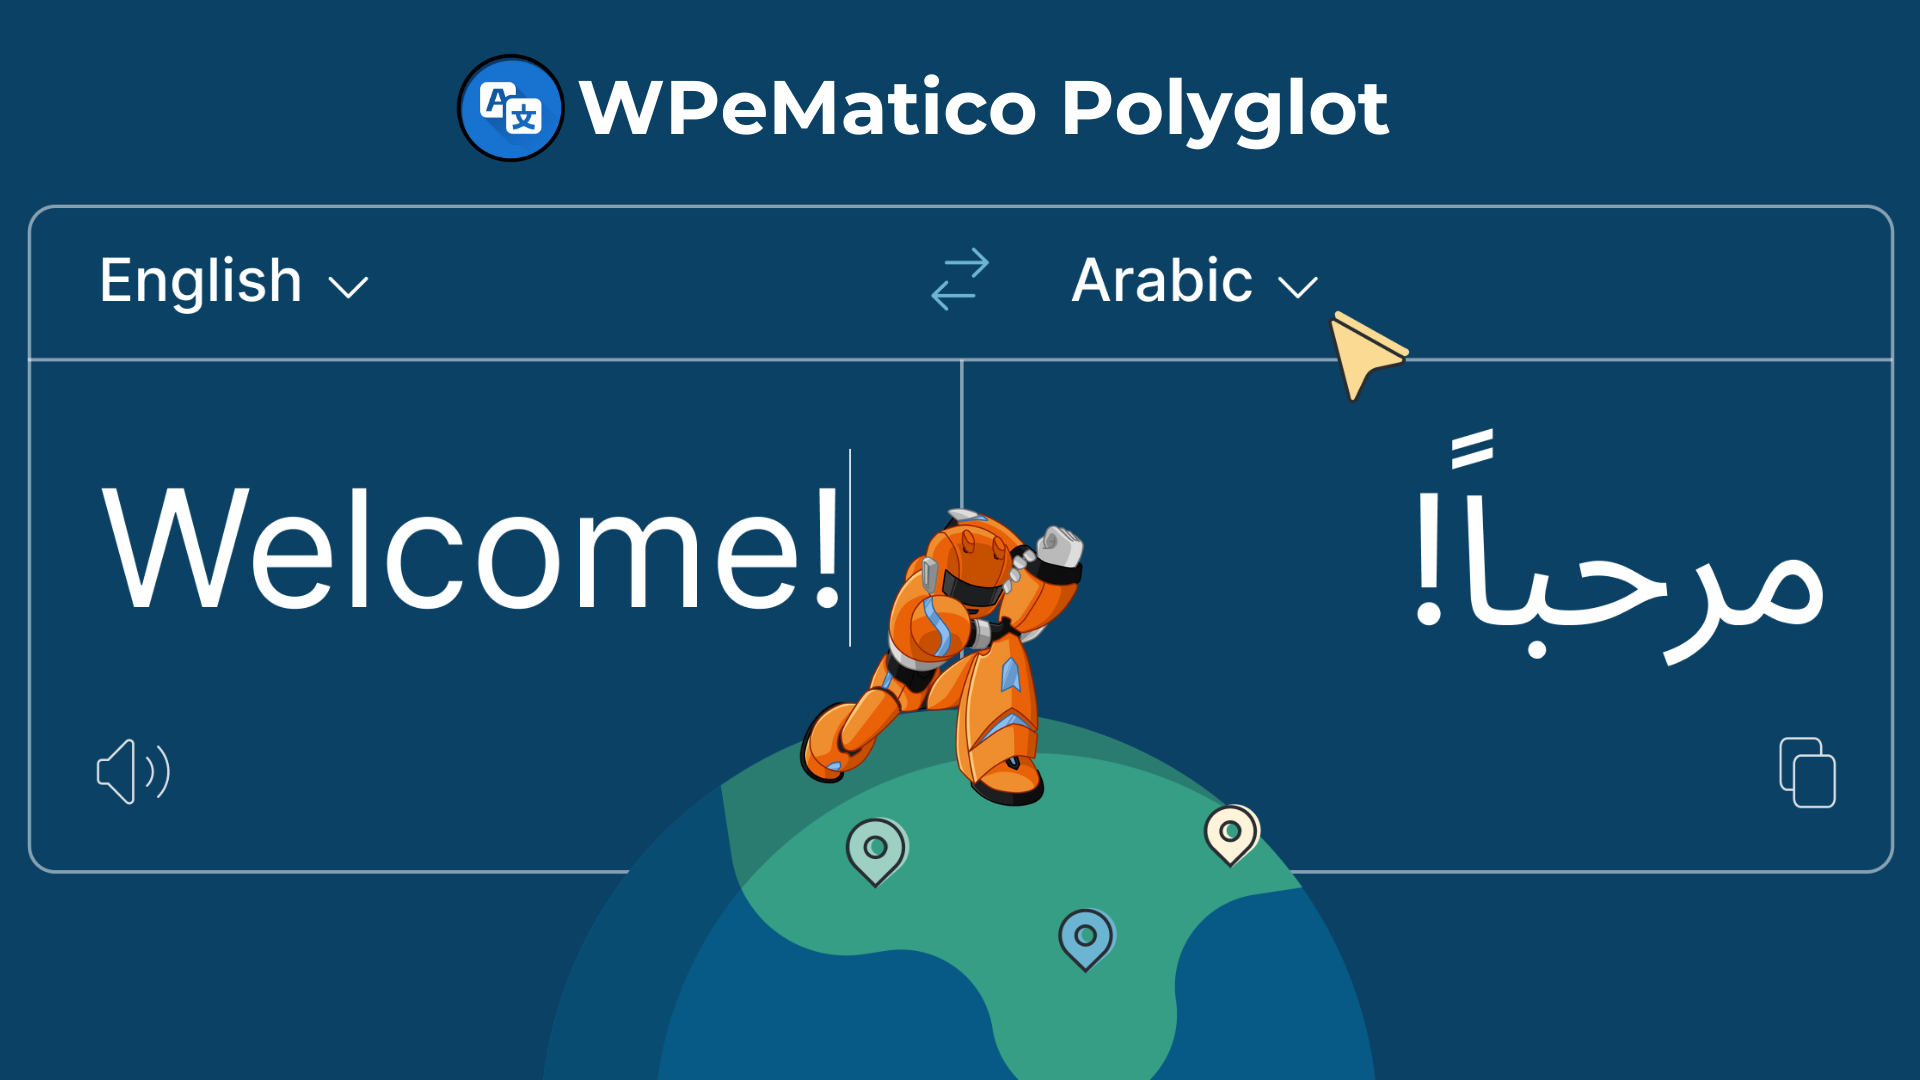 Exciting news about wpematico polyglot and deepl - wpematico polyglot 1